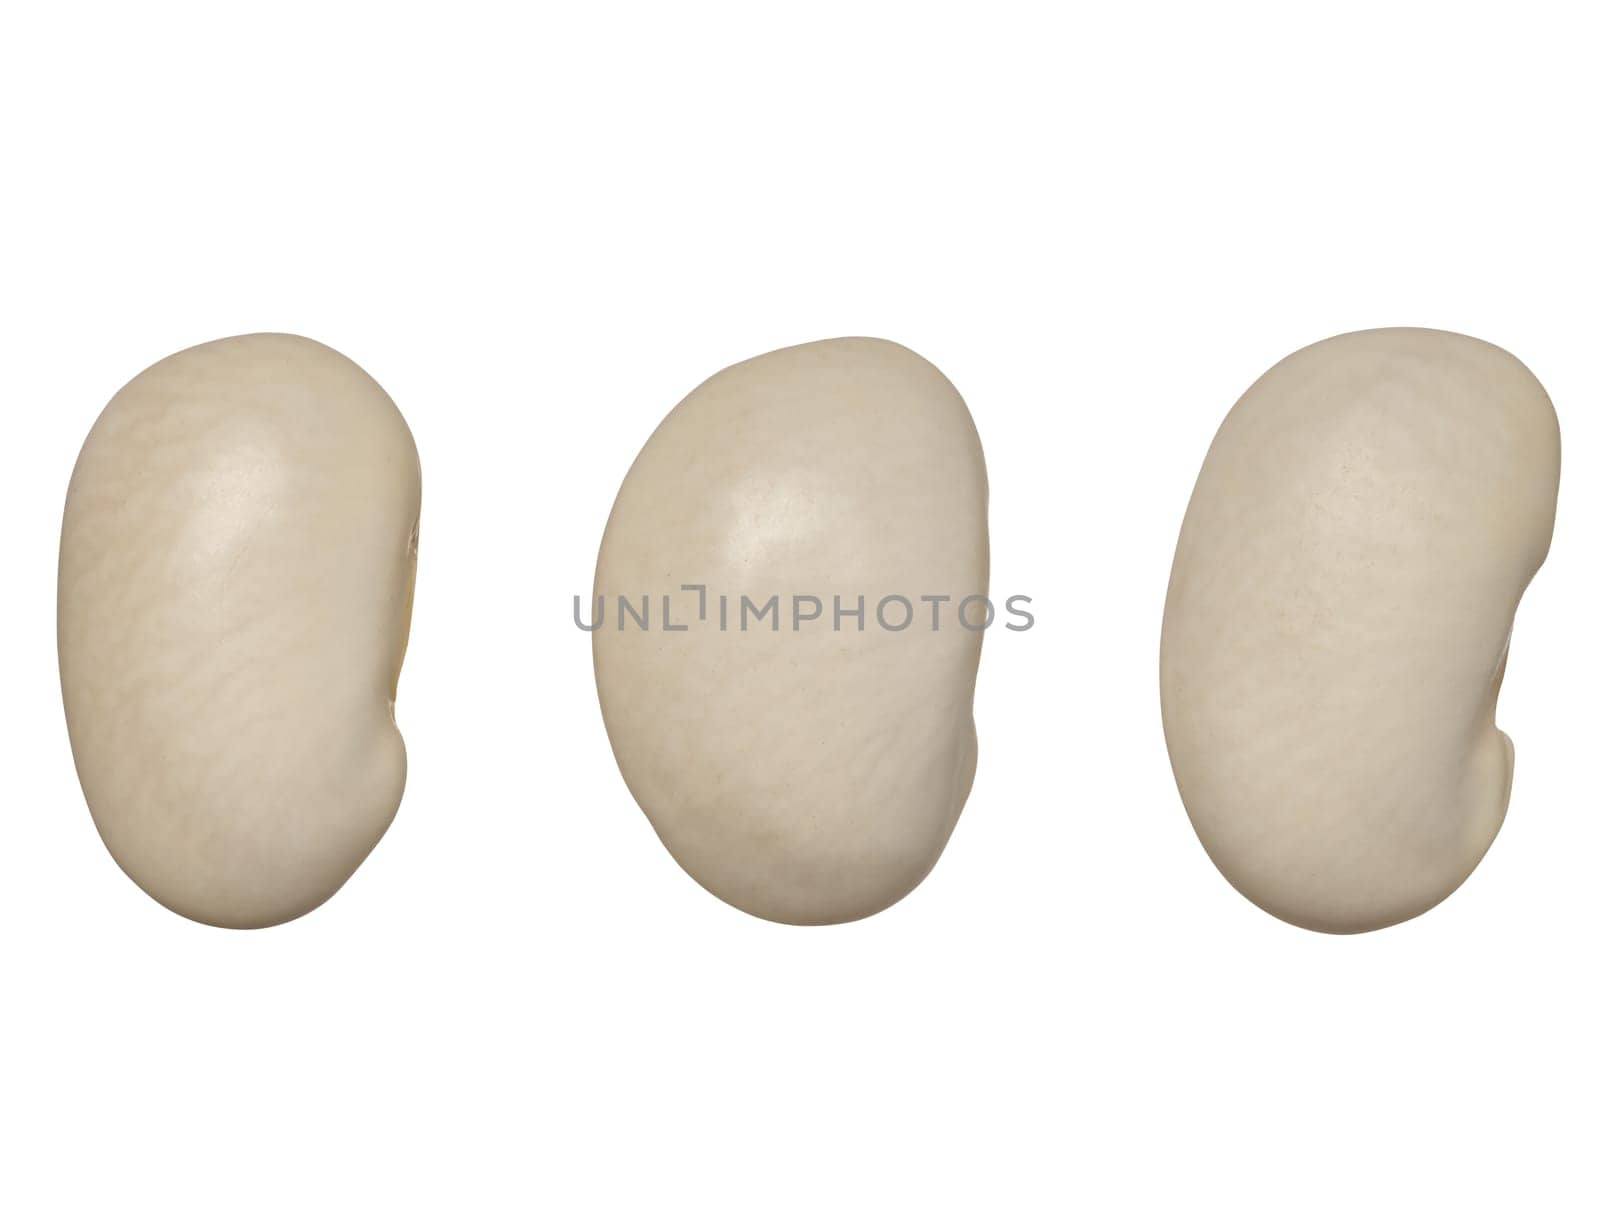 Raw white beans on isolated background, top view by ndanko